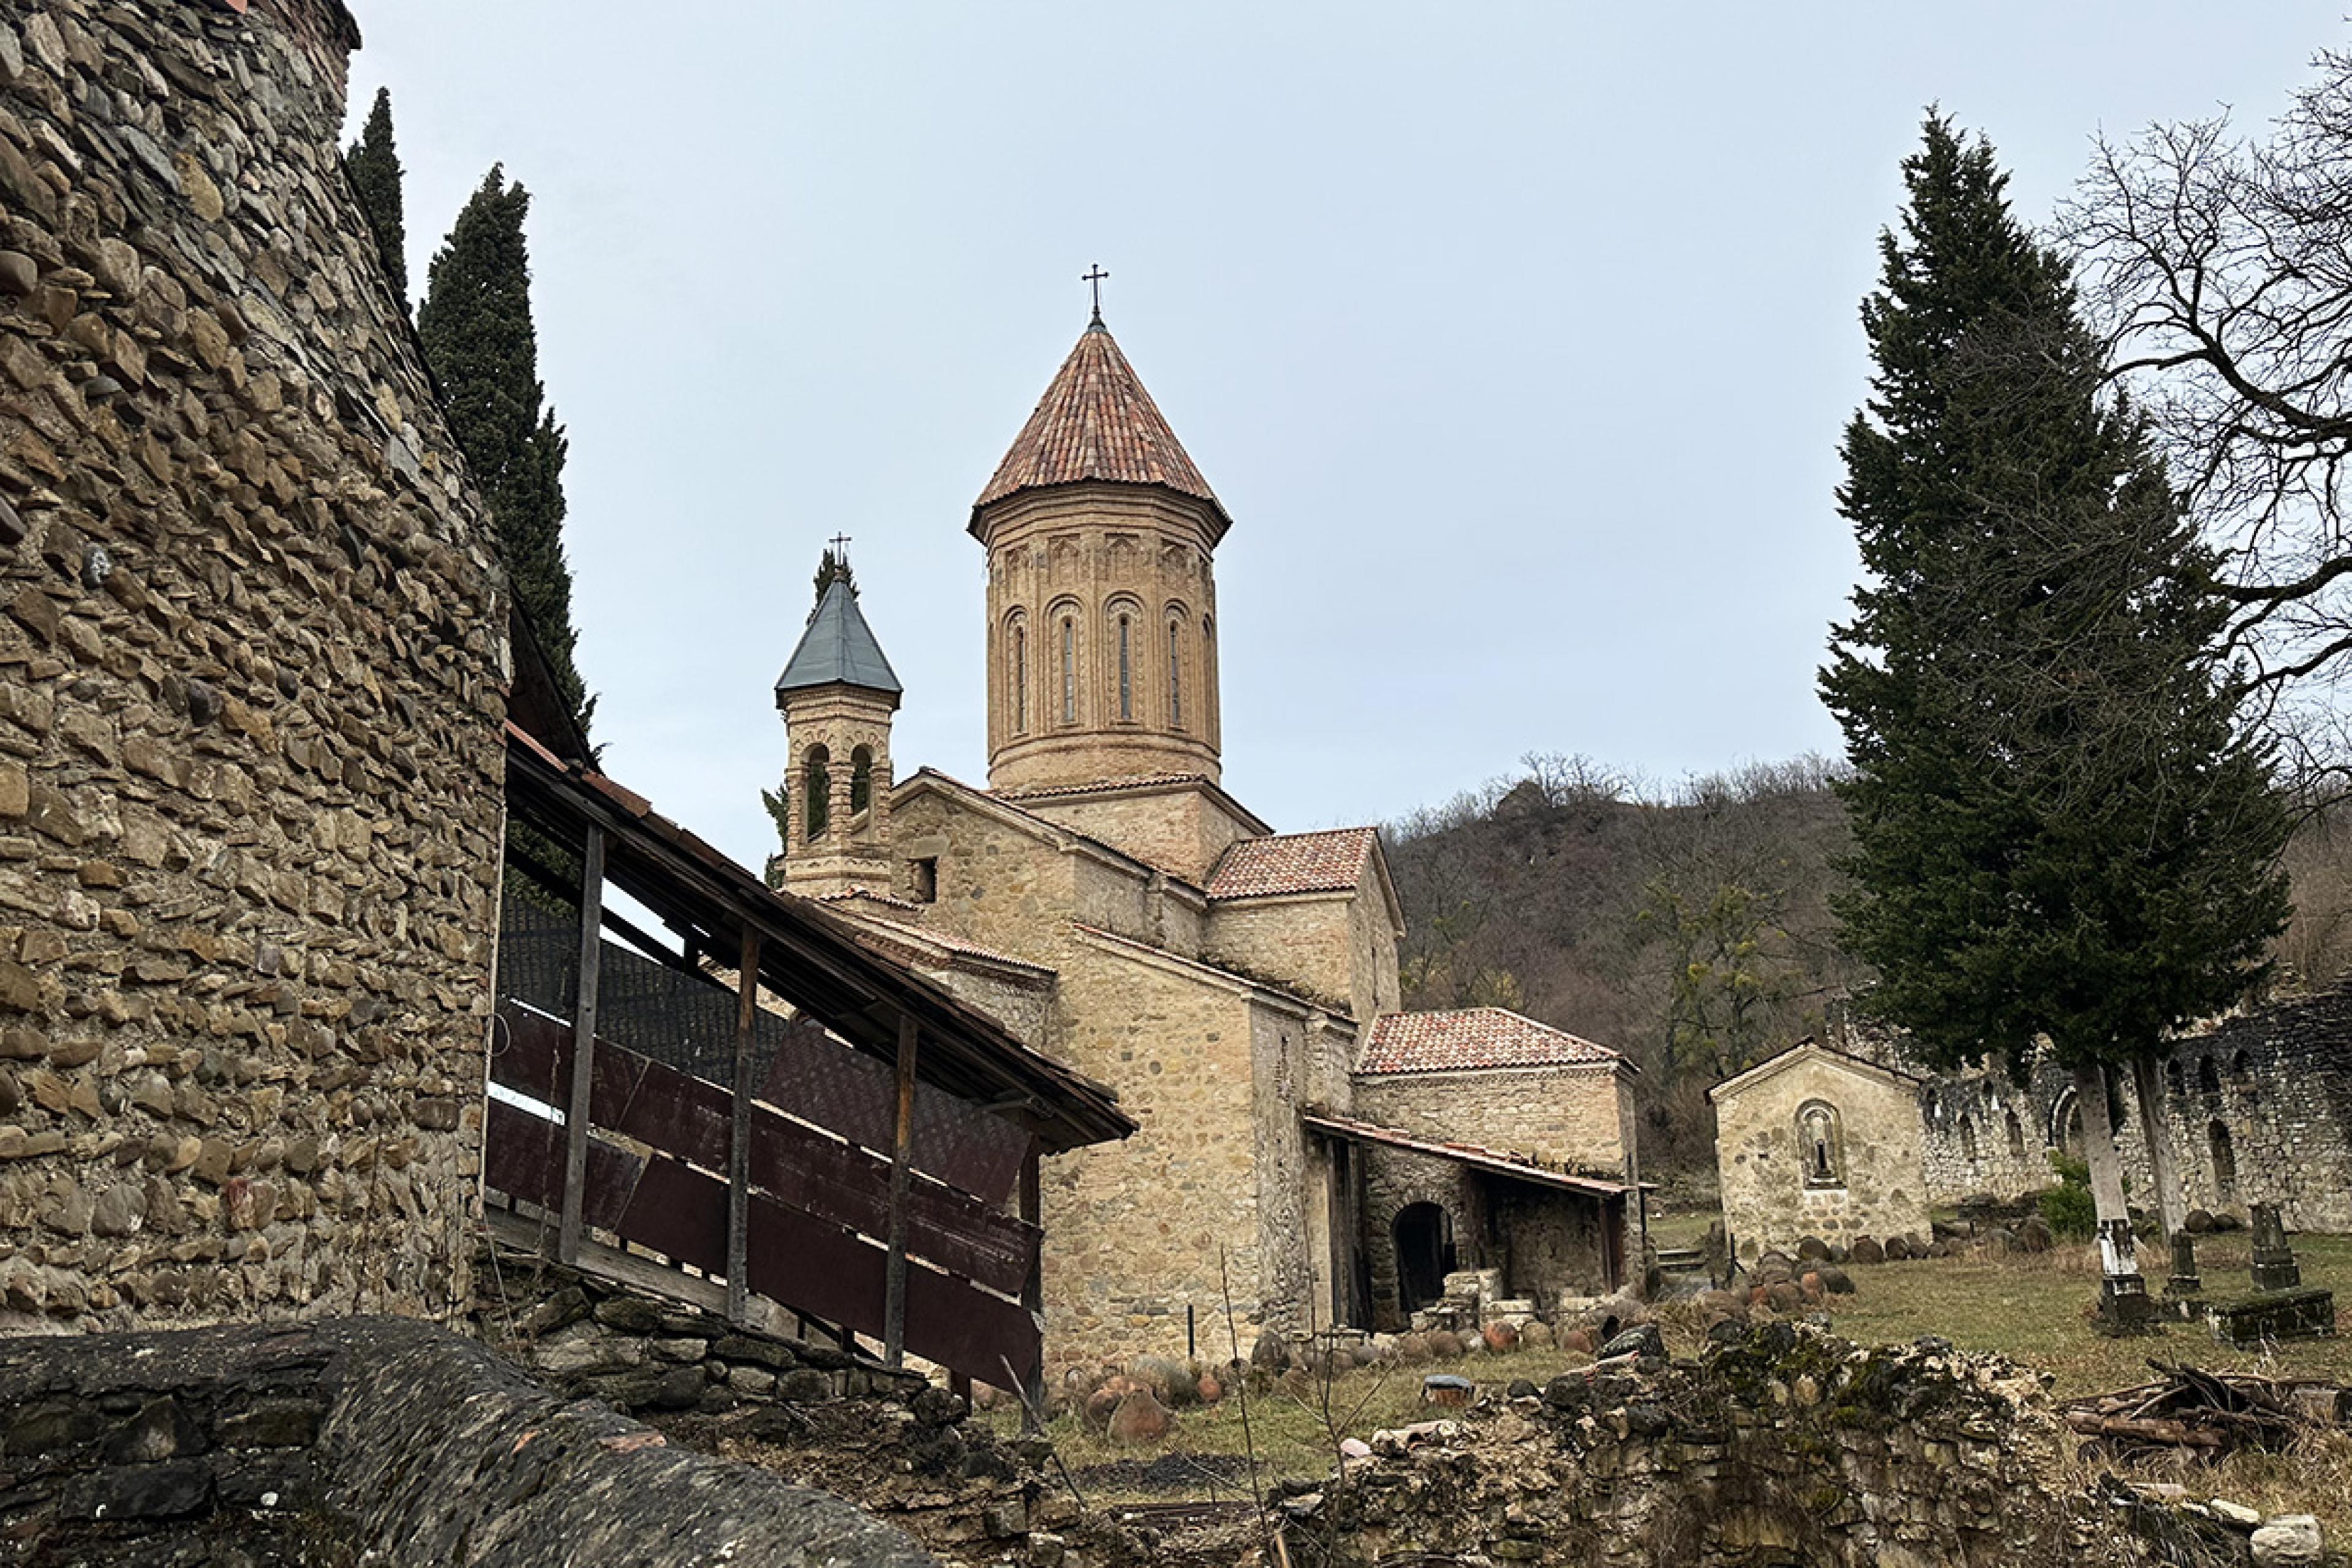 view of a stone monastery